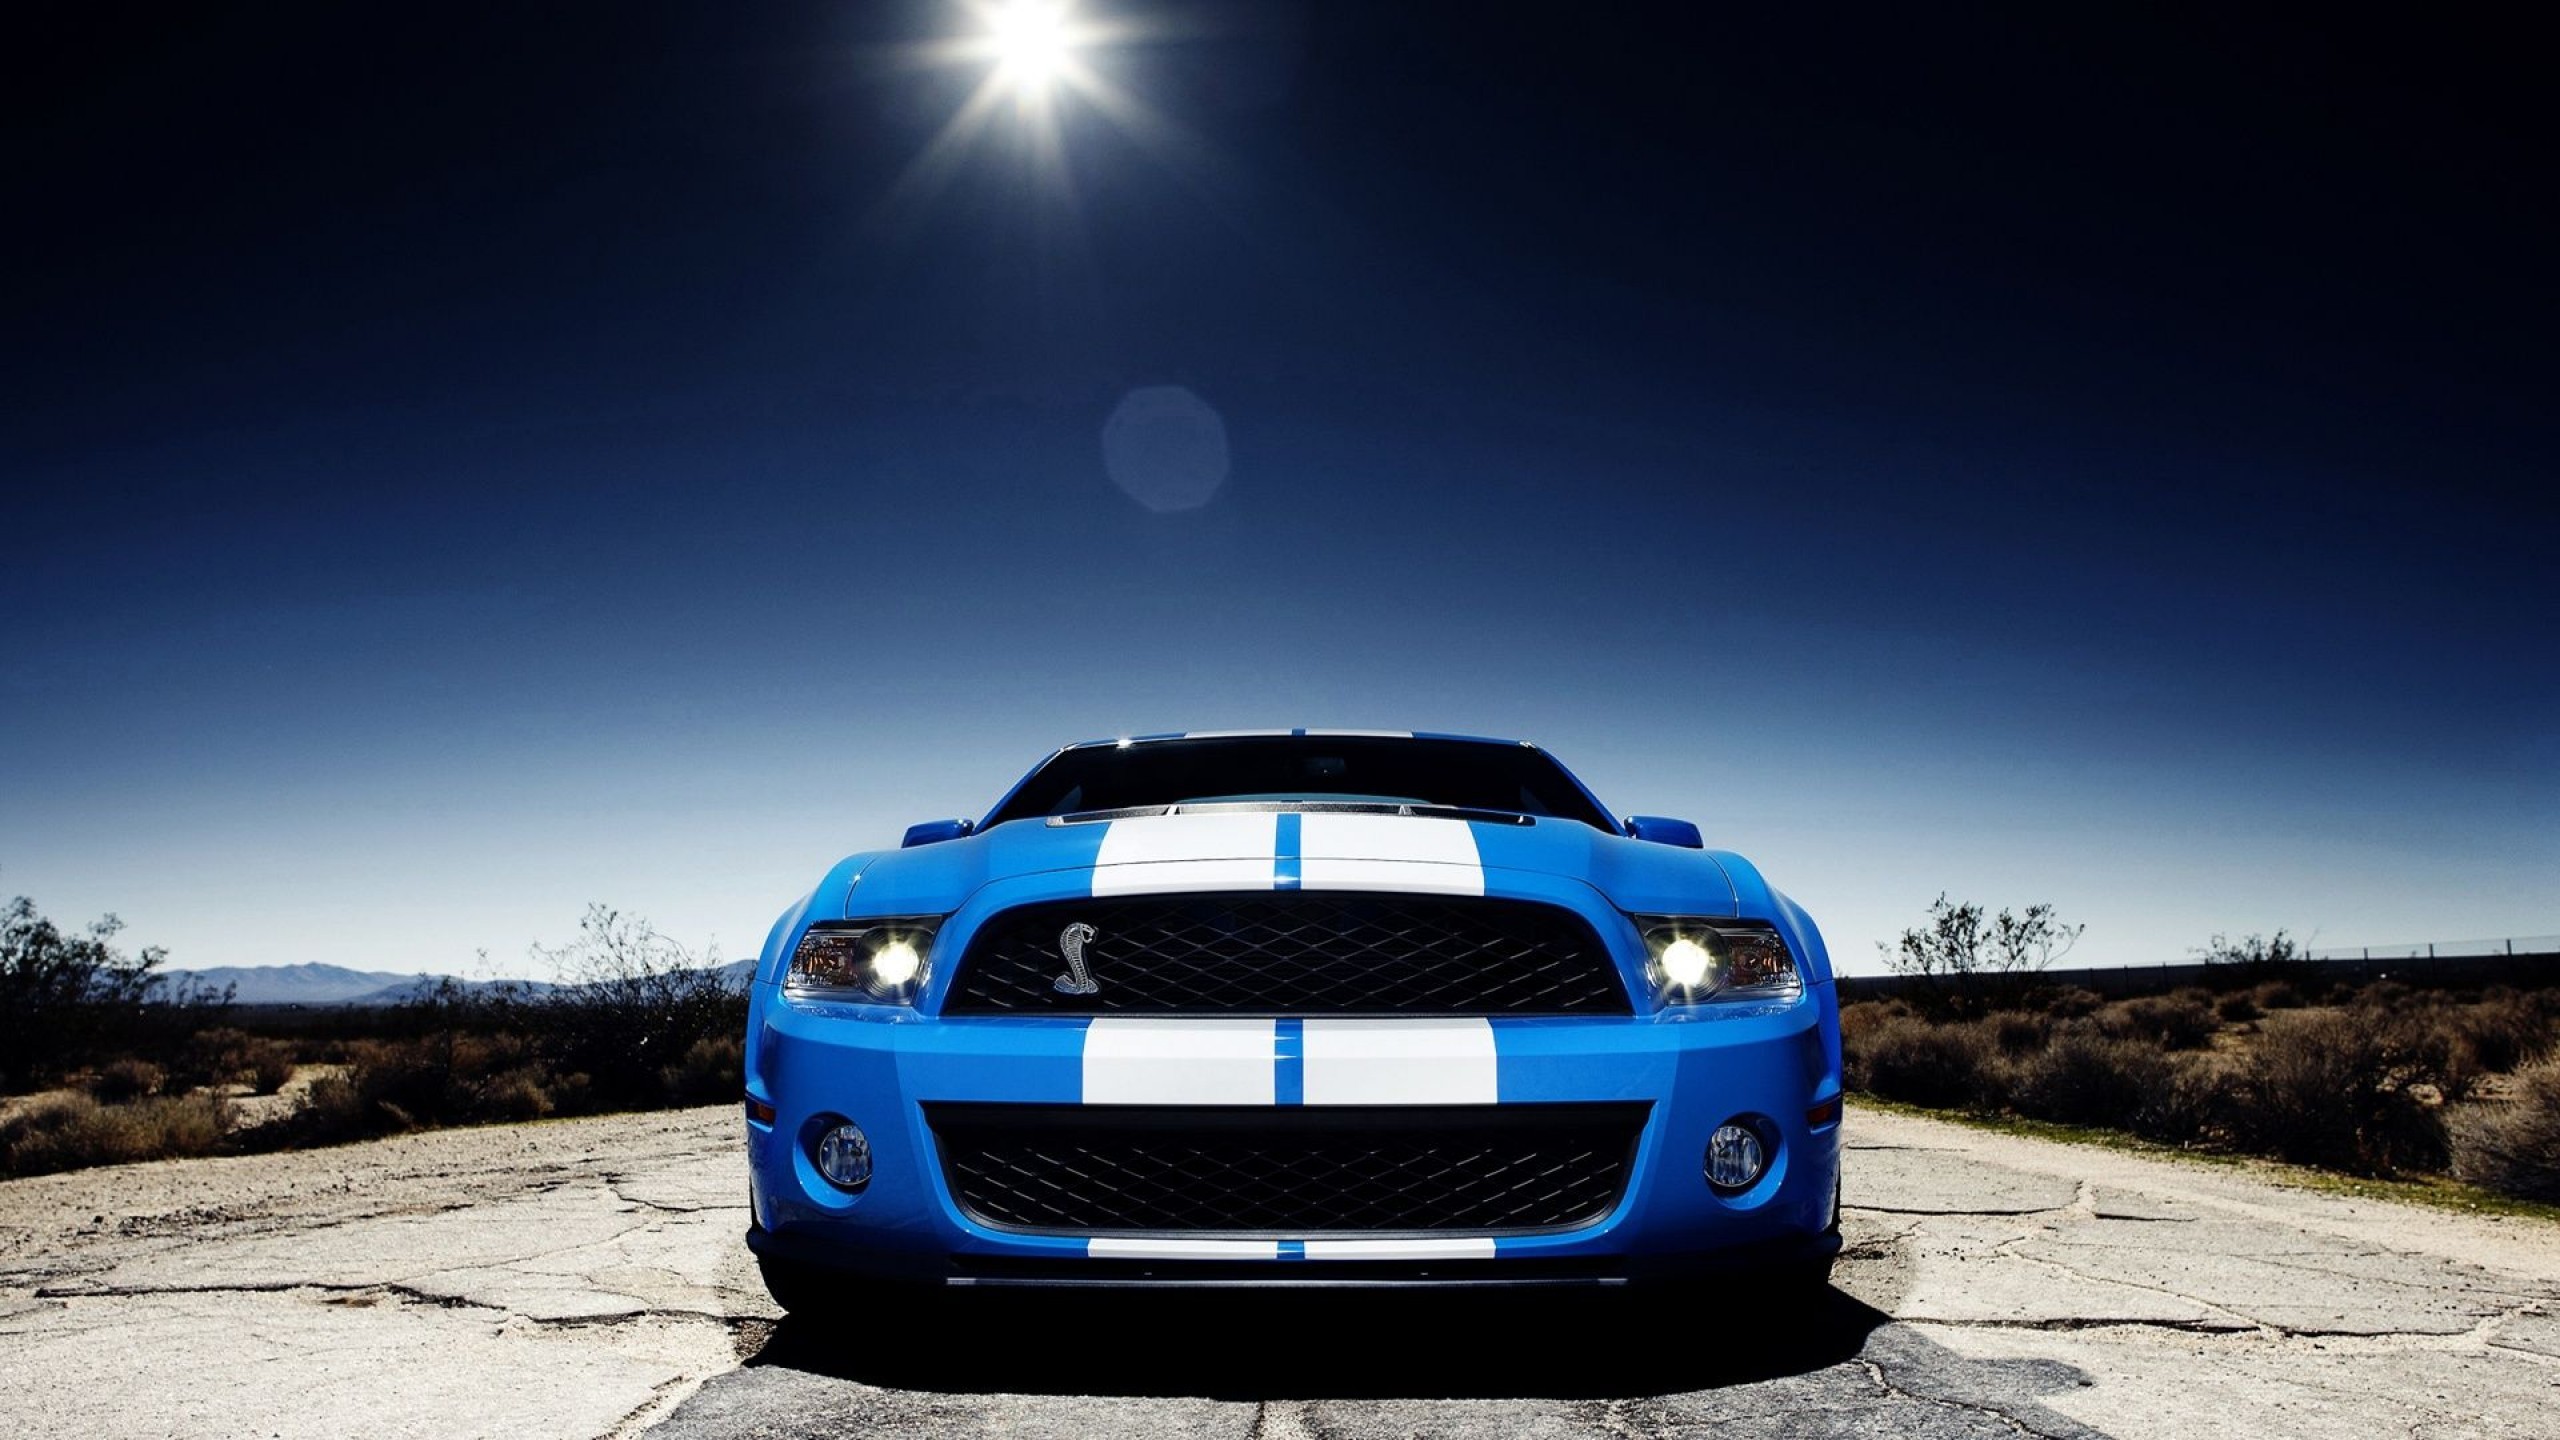 2560x1440 Ford Mustang Shelby GT500 Front View HD Wallpaper #4927 Wallpaper